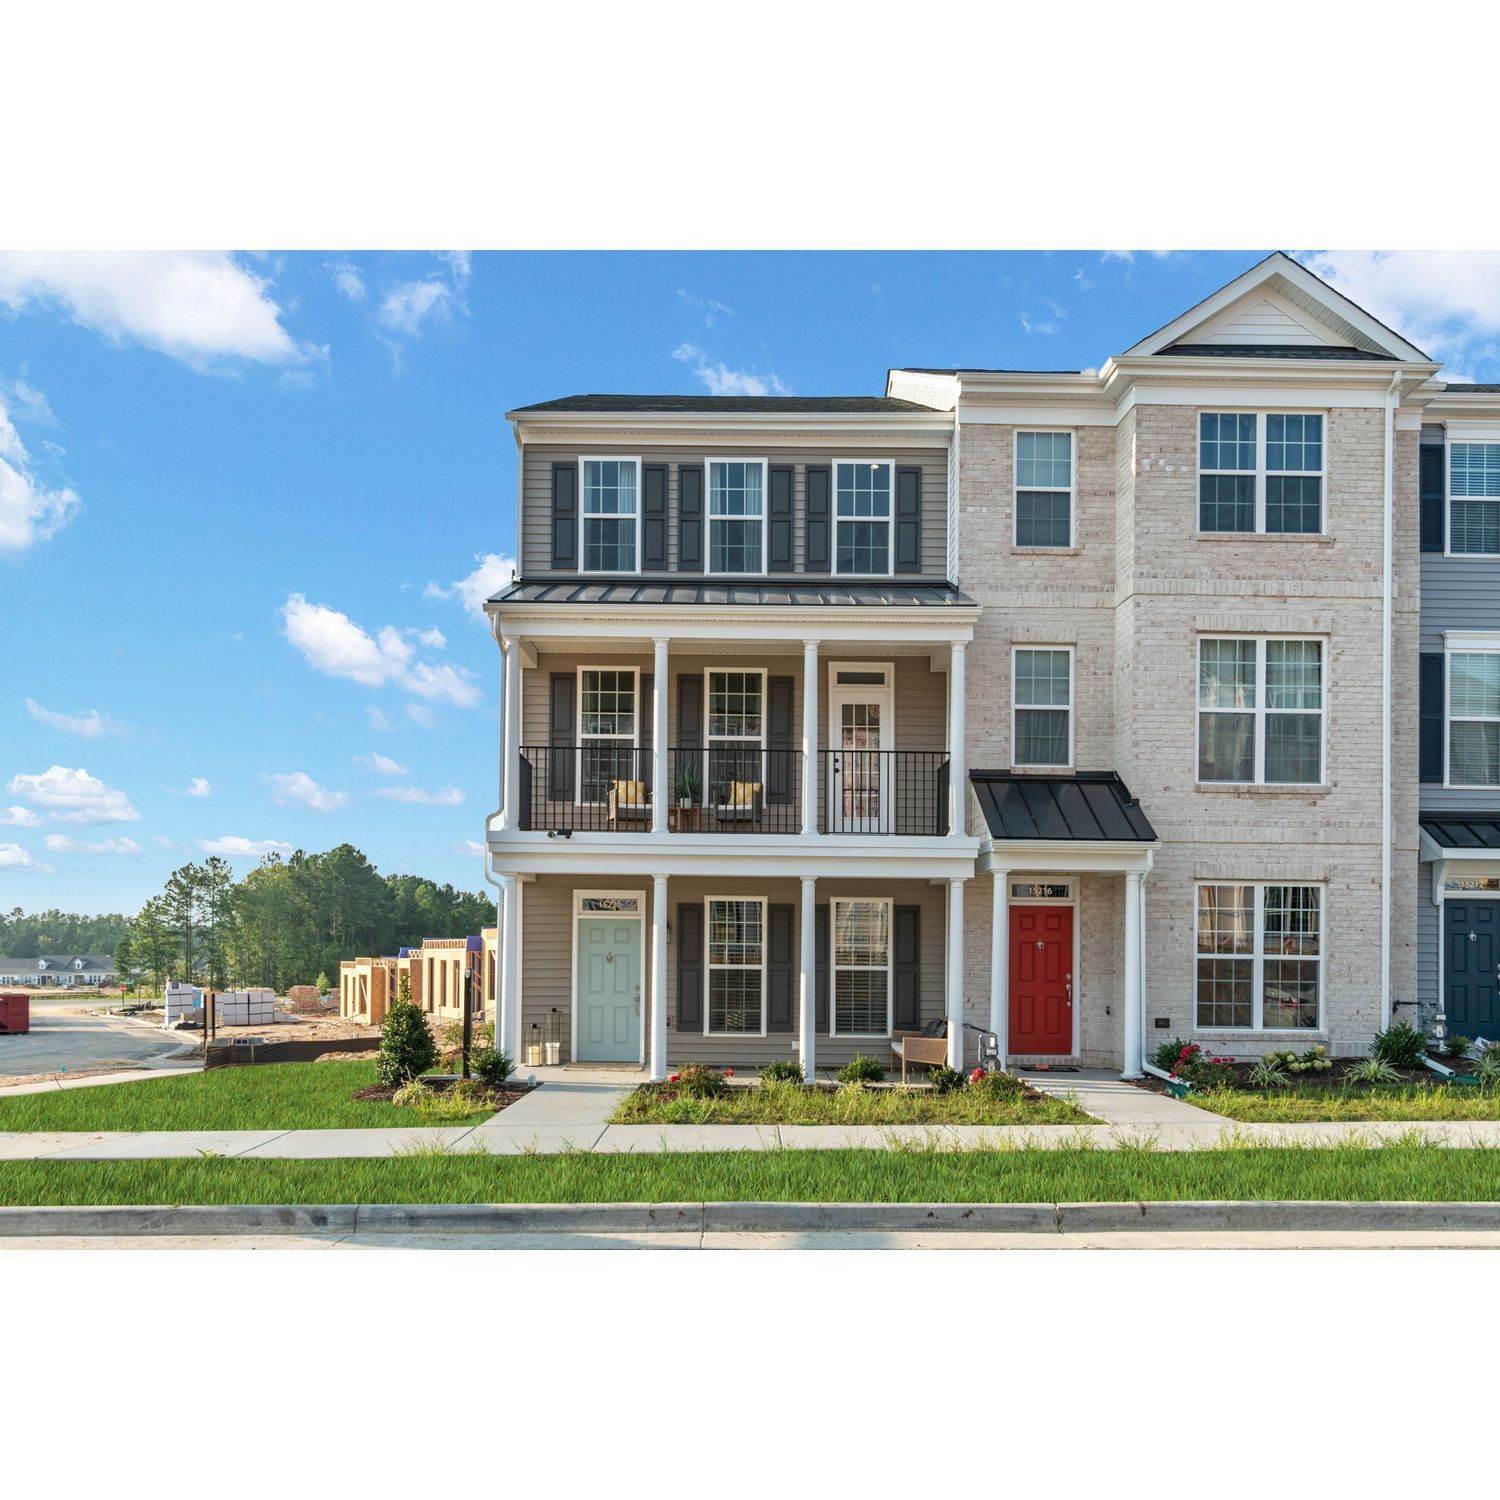 3. Cosby Village 3-Story Townhomes building at 15220 Dunton Avenue, Chesterfield, VA 23832